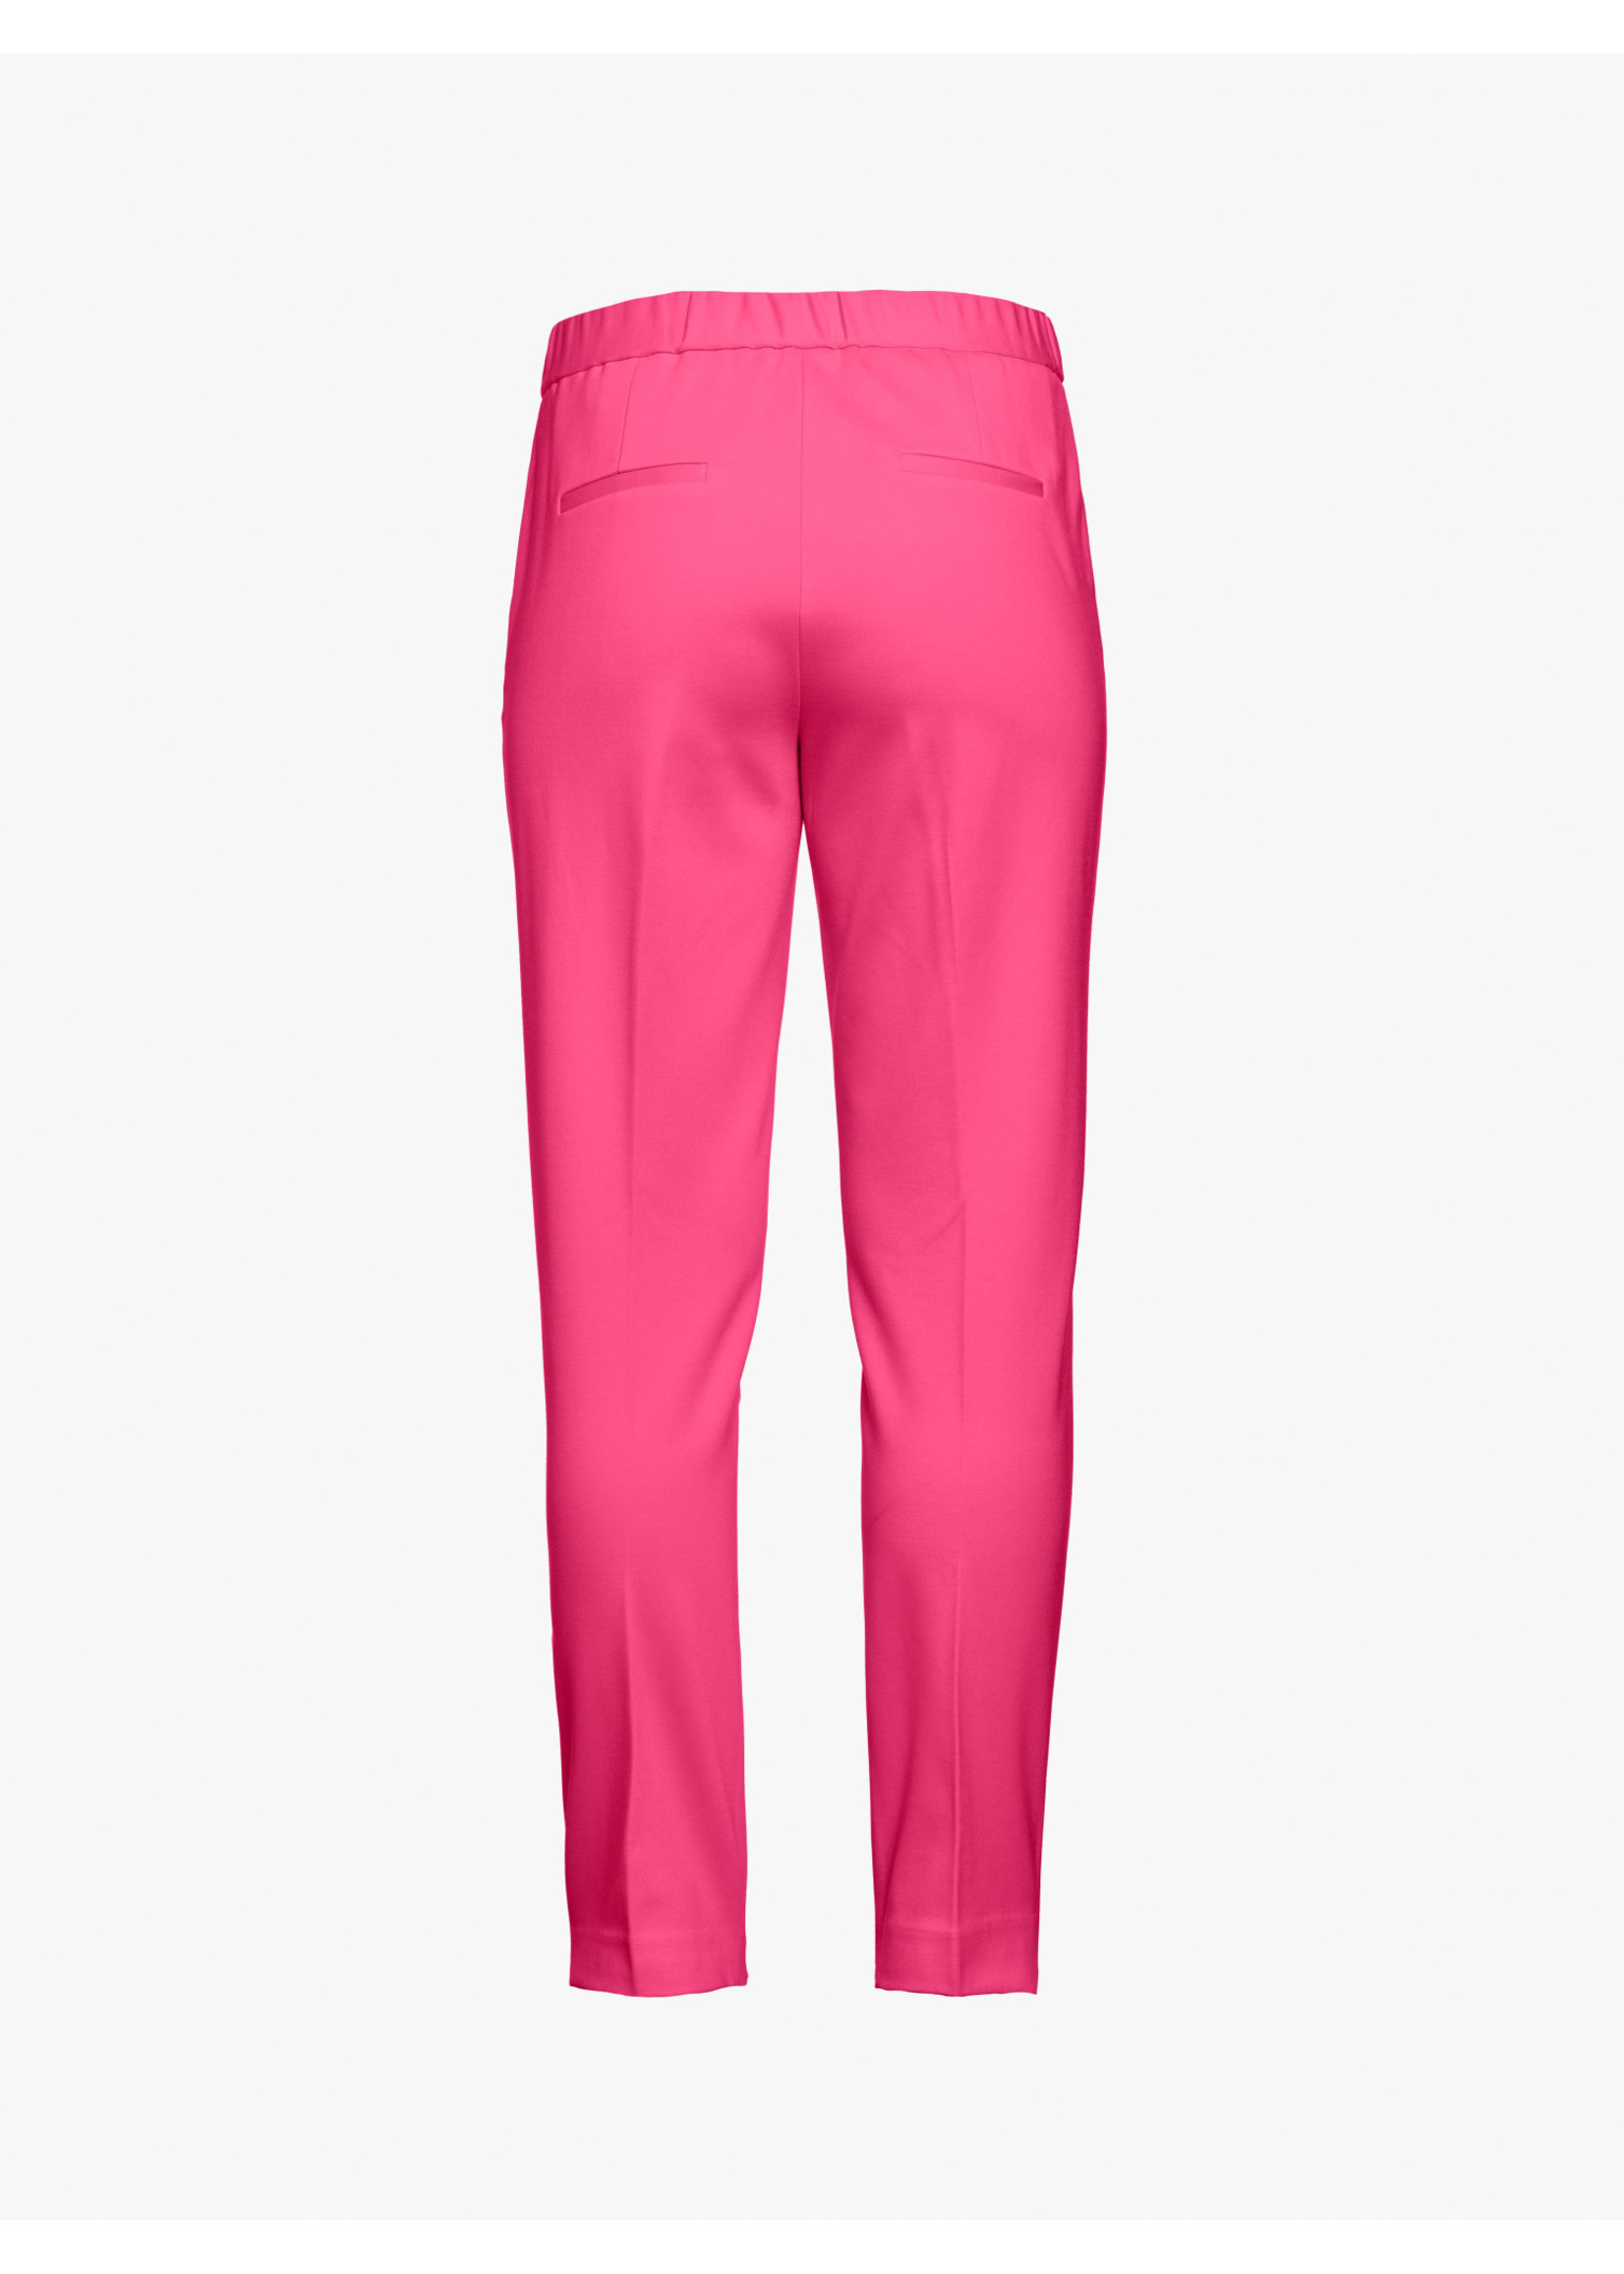 Beaumont Beaumont - Nola Pants Chino Double Jersey - Pink